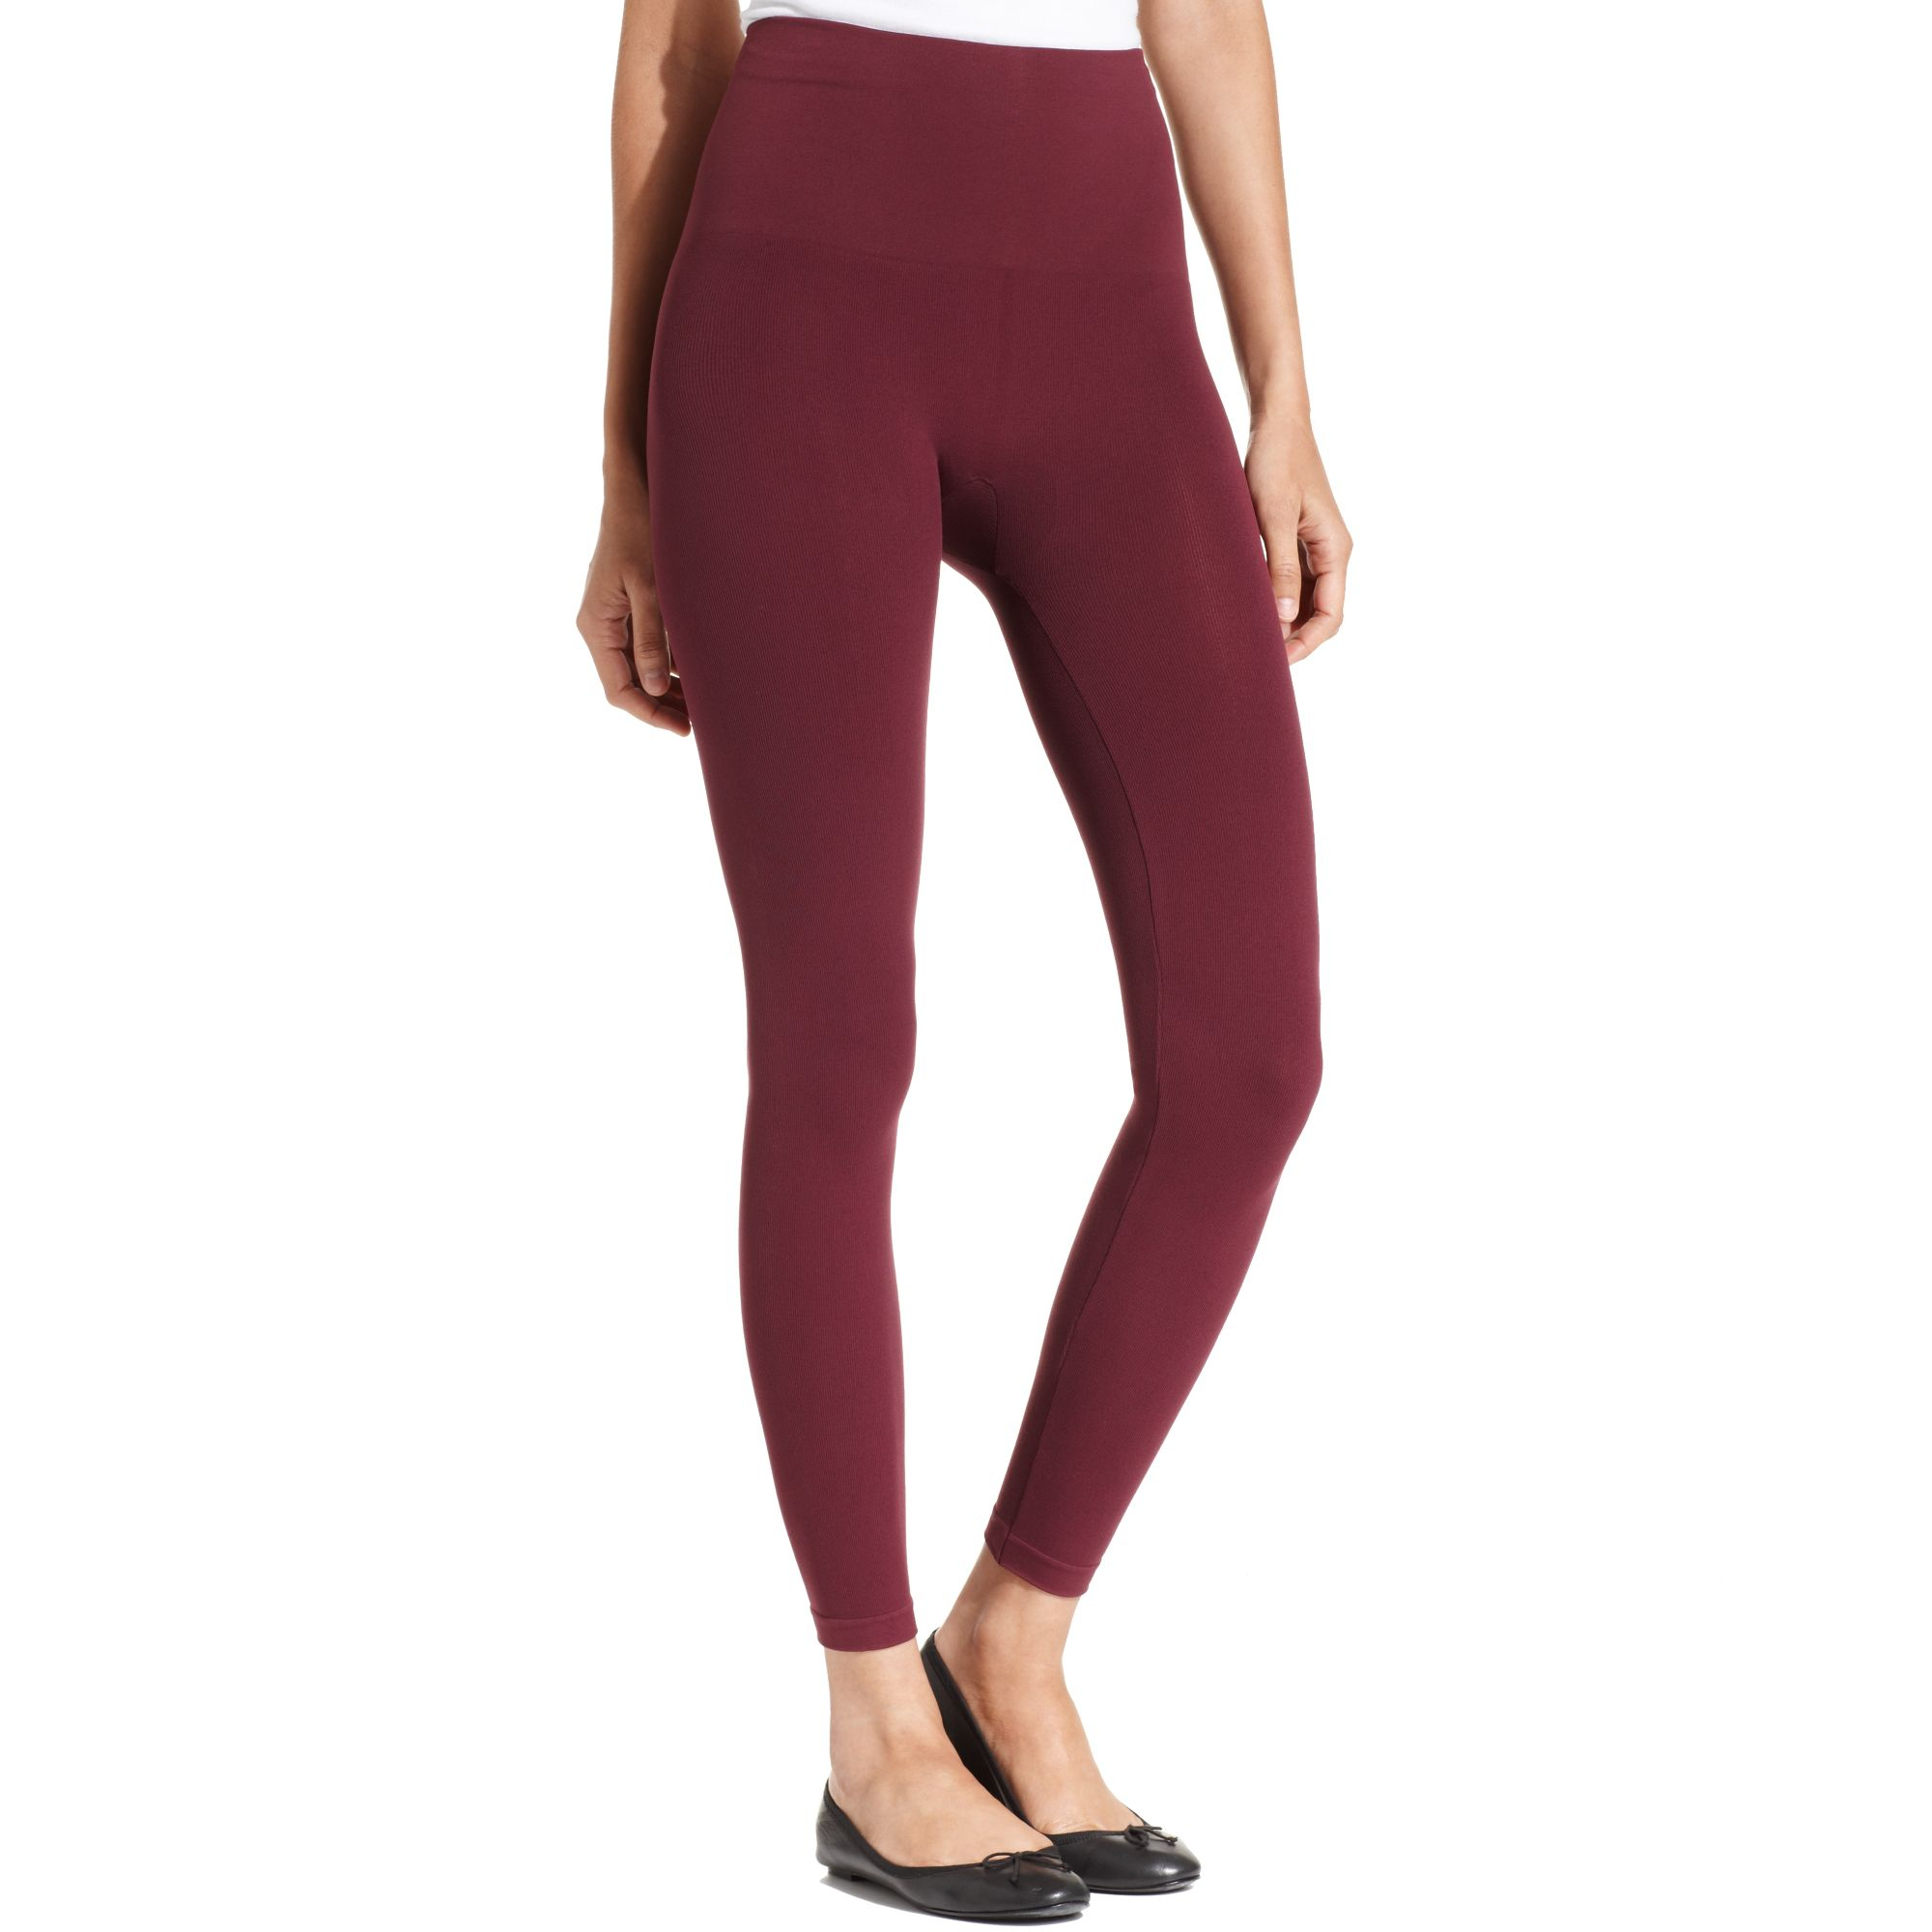 https://cdna.lystit.com/photos/96c5-2014/01/30/star-power-by-spanx-purple-wide-waistband-shaping-leggings-product-1-12581317-0-084883025-normal.jpeg